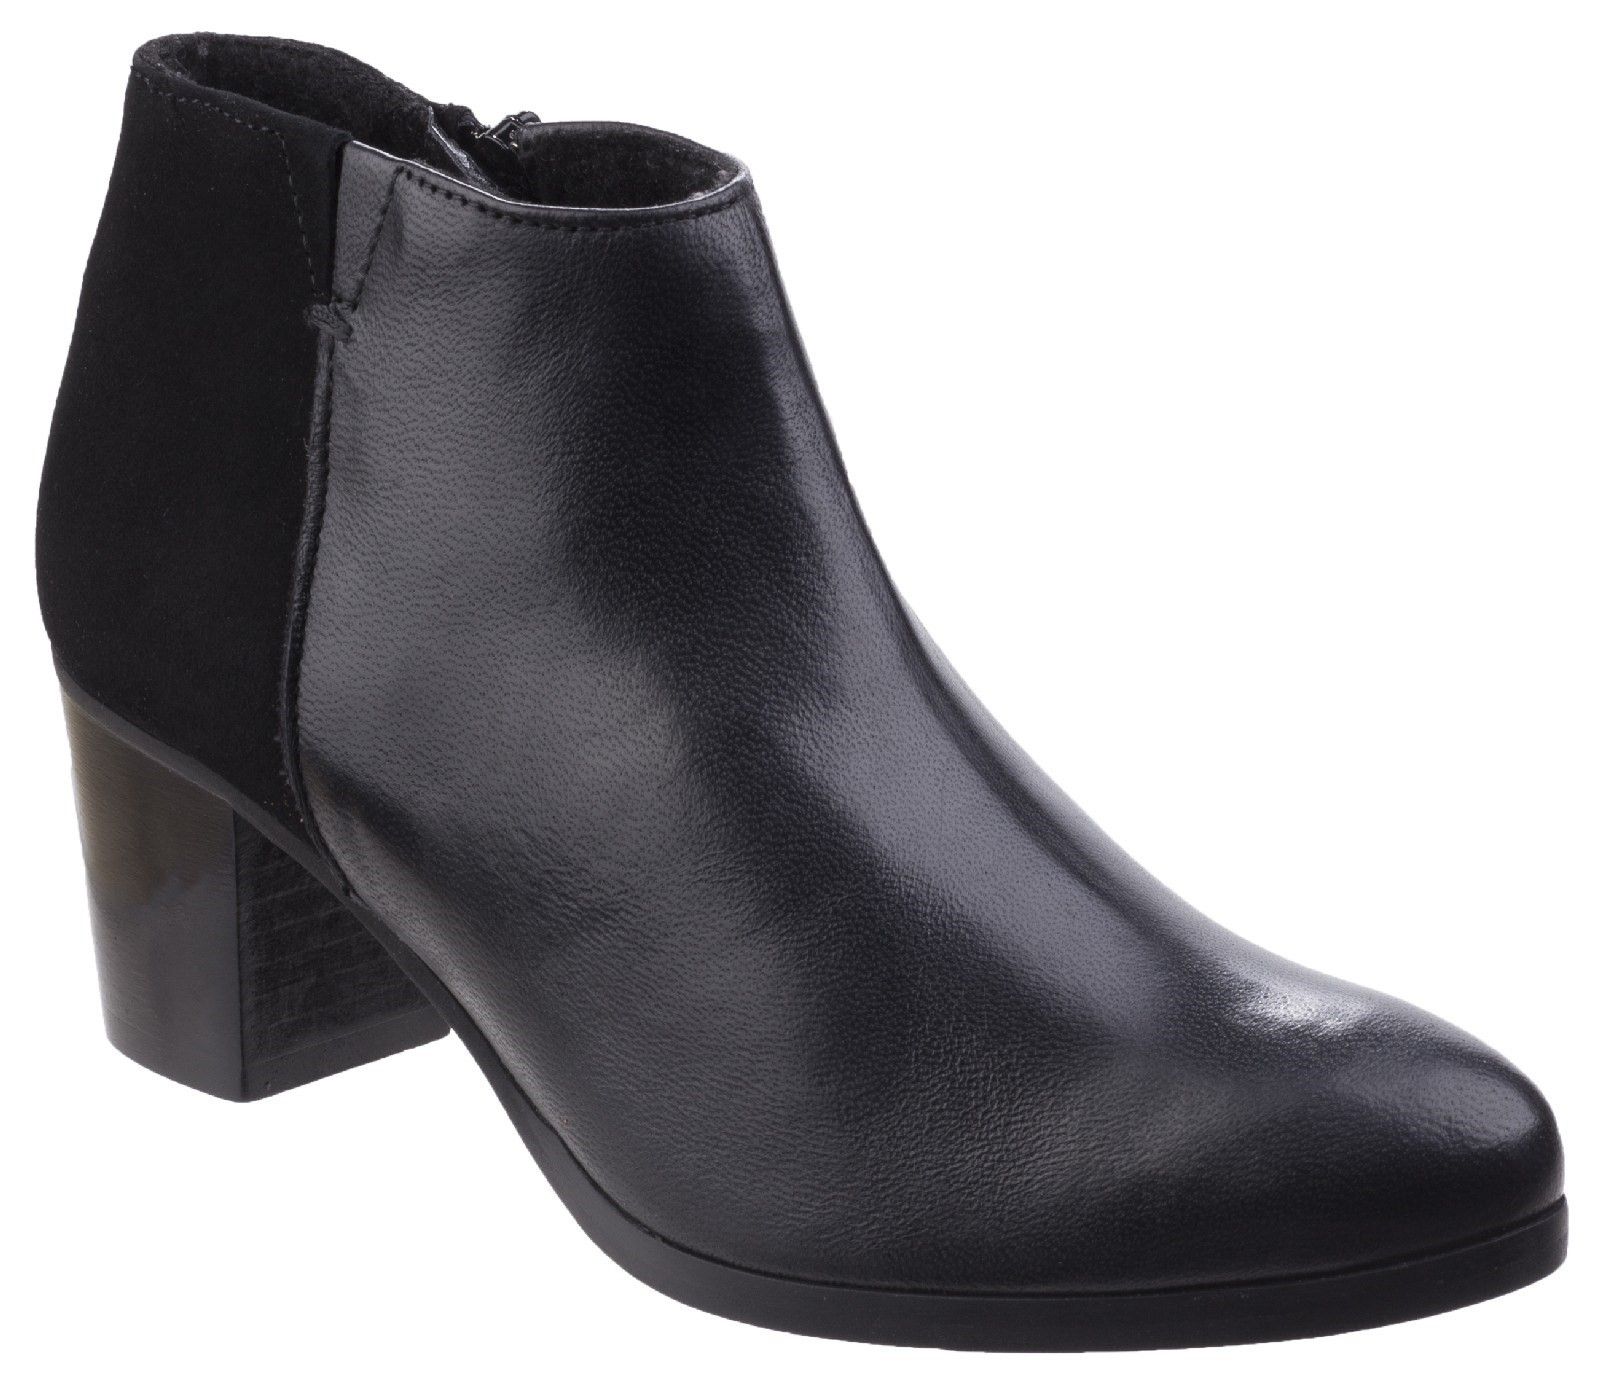 Riva brings in a twist with this eye-catching evening boot with warm lining.  Half suede and smooth leather panels gives an elegant contrast to a traditional ankle boot. Crafted with a luxury leather upper. 
Flexible and supple smooth leather vamp. 
Brushed suede back. 
Full side zip opening. 
Subtle elasticated v-neck side panel for additional fitting.